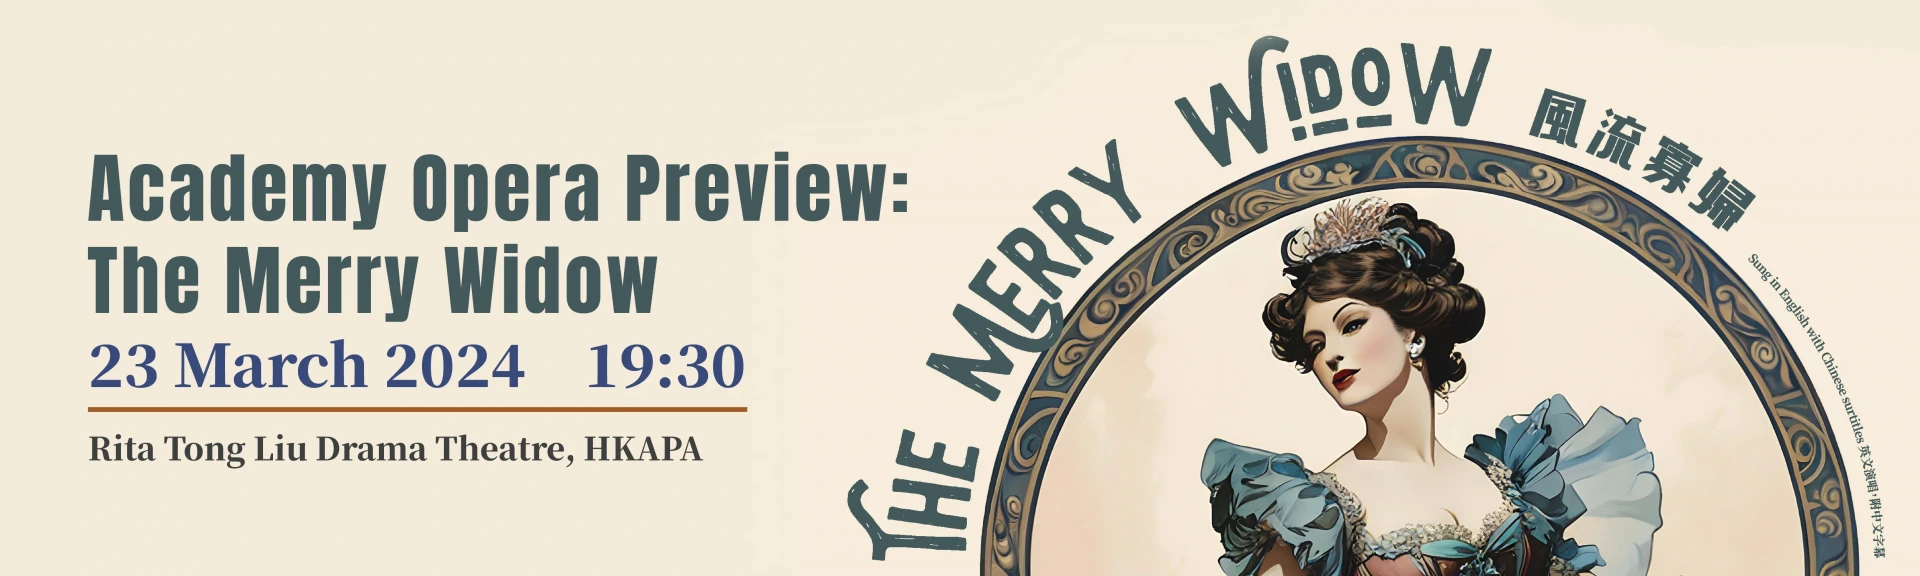 Make a date with The Merry Widow